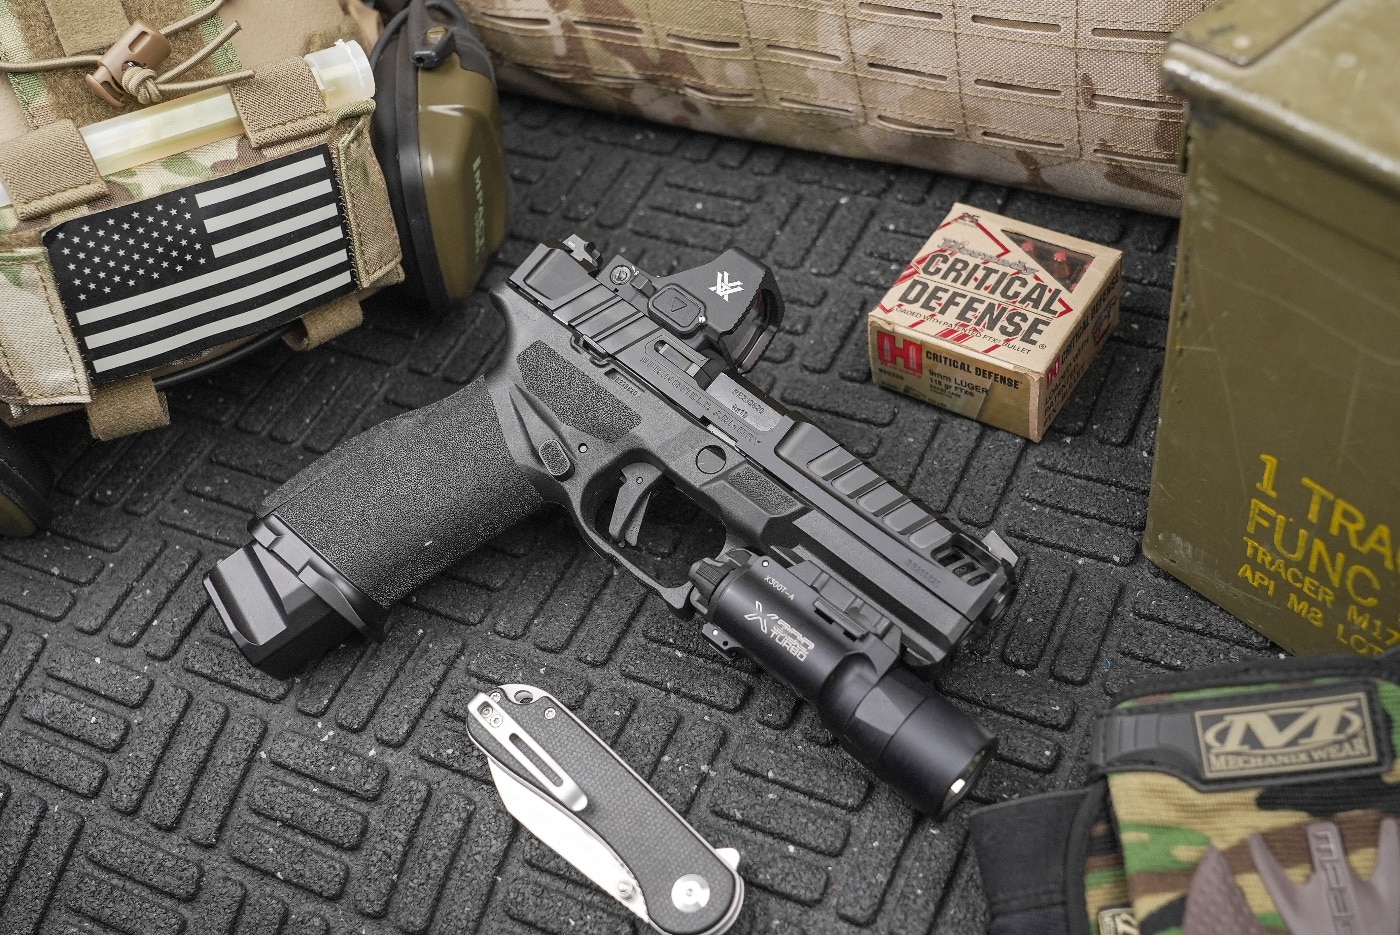 This is the Vortex Defender XL used in the review testing. It is a red dot sight designed for all kinds of firearms including pistol rifle and shotgun. Shown here it is on a Springfield Armory Echelon but it can also mount to a Glock SIG Sauer and Smith & Wesson handguns. For shooting it offers great accuracy.